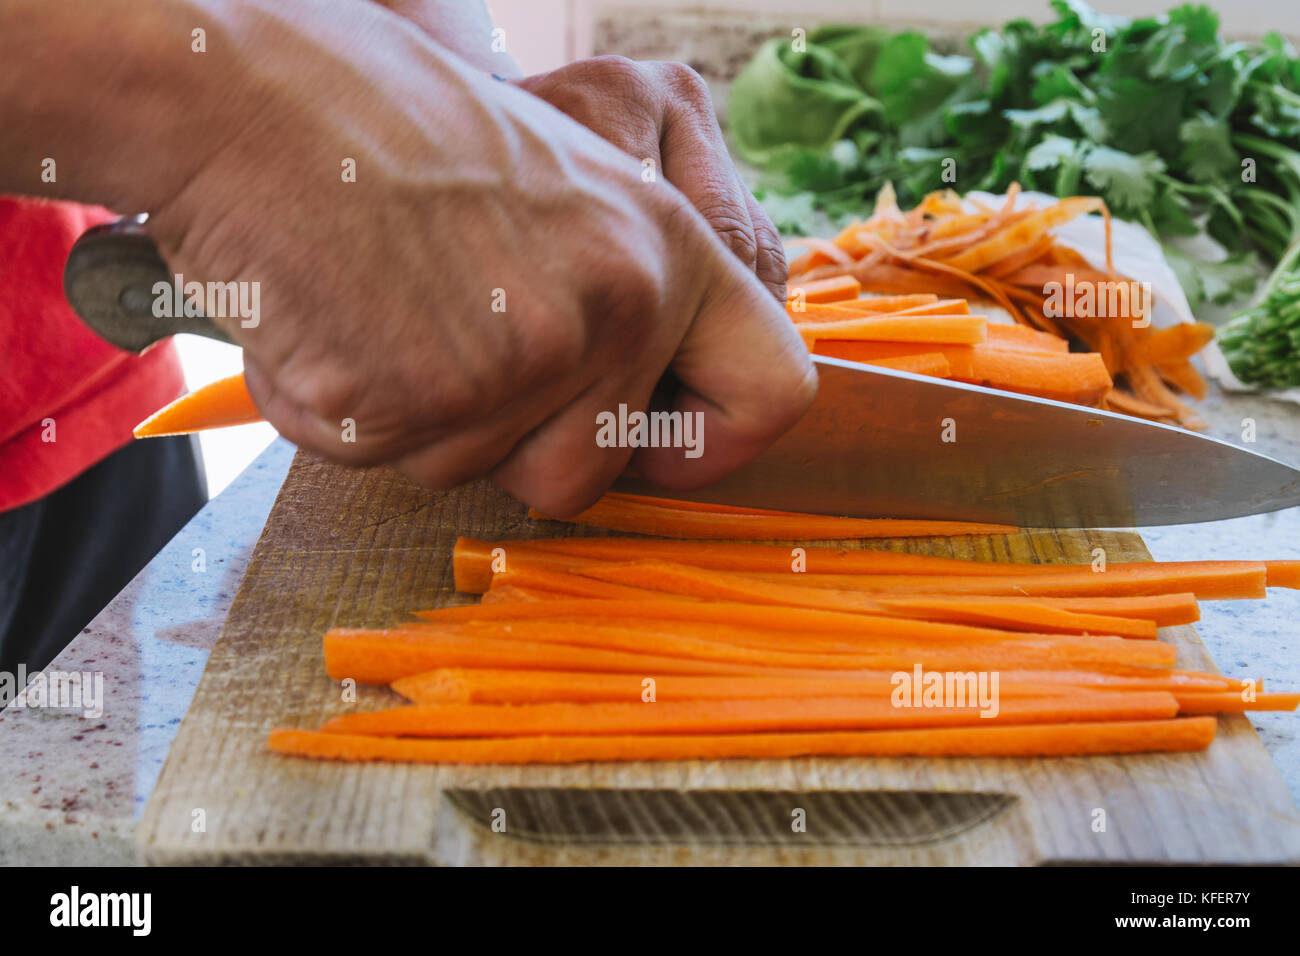 man's hands, cut carrot julienne style, in the kitchen Stock Photo